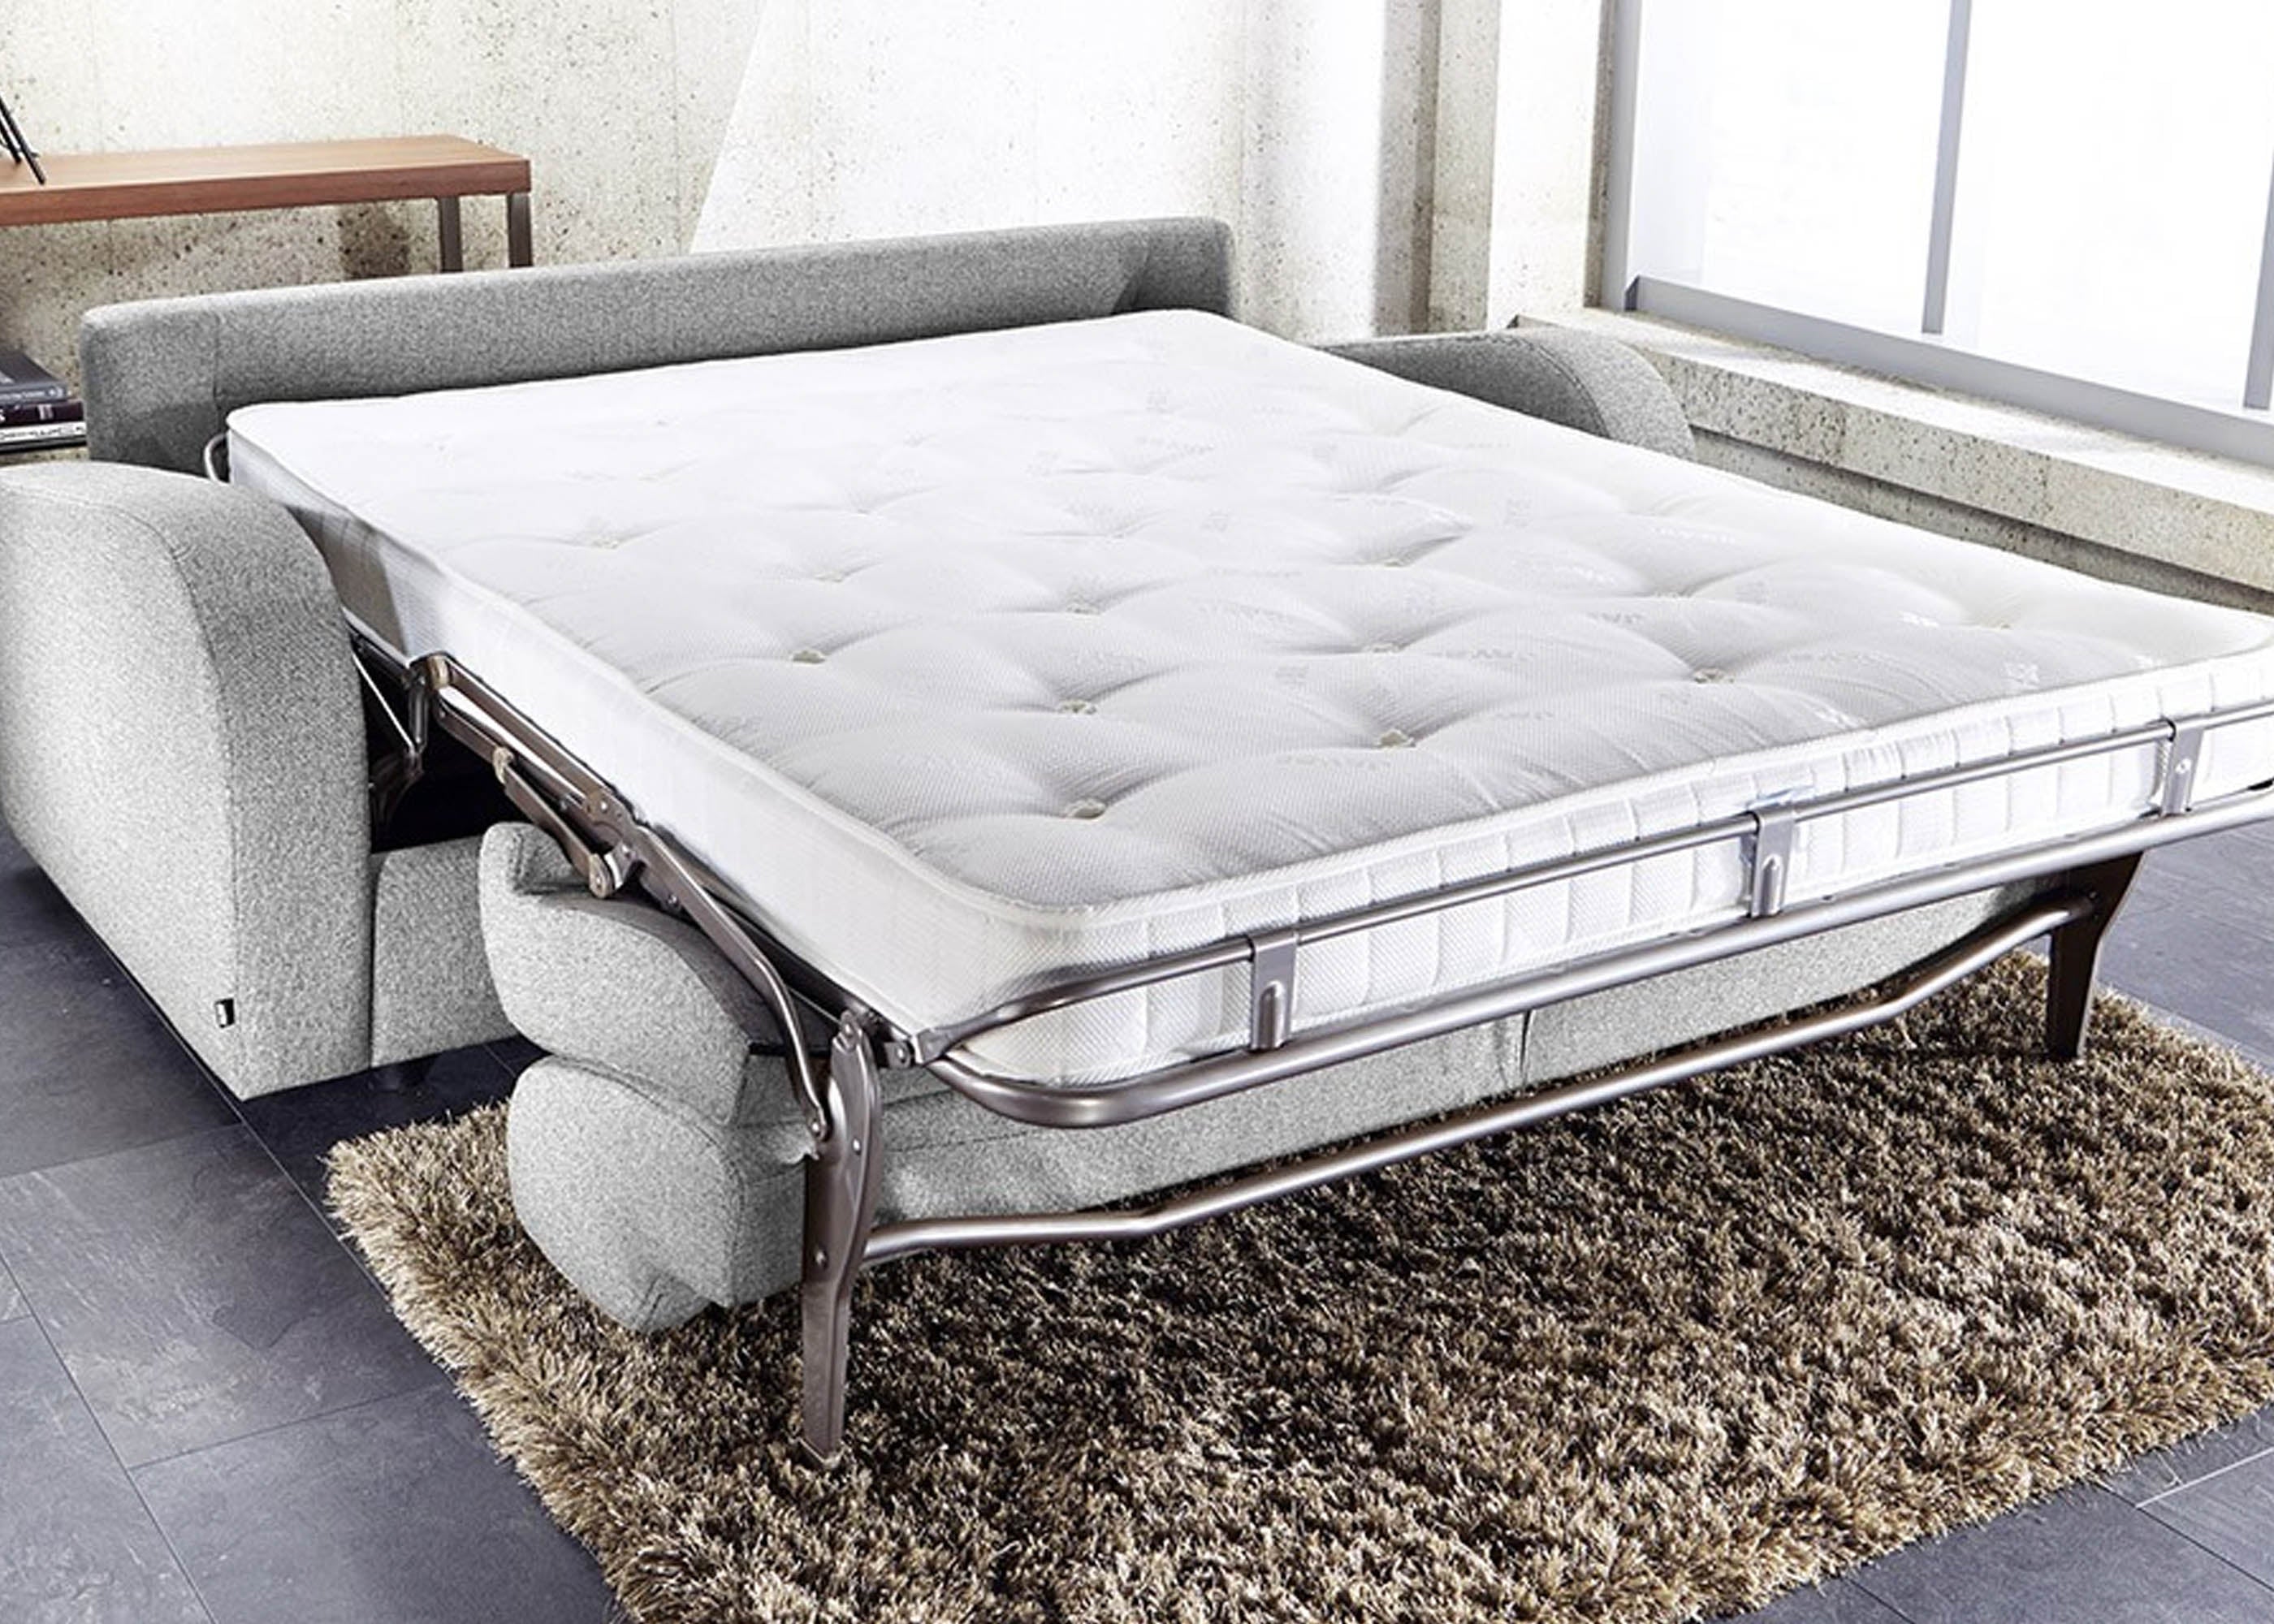 extra mattress for sofa bed